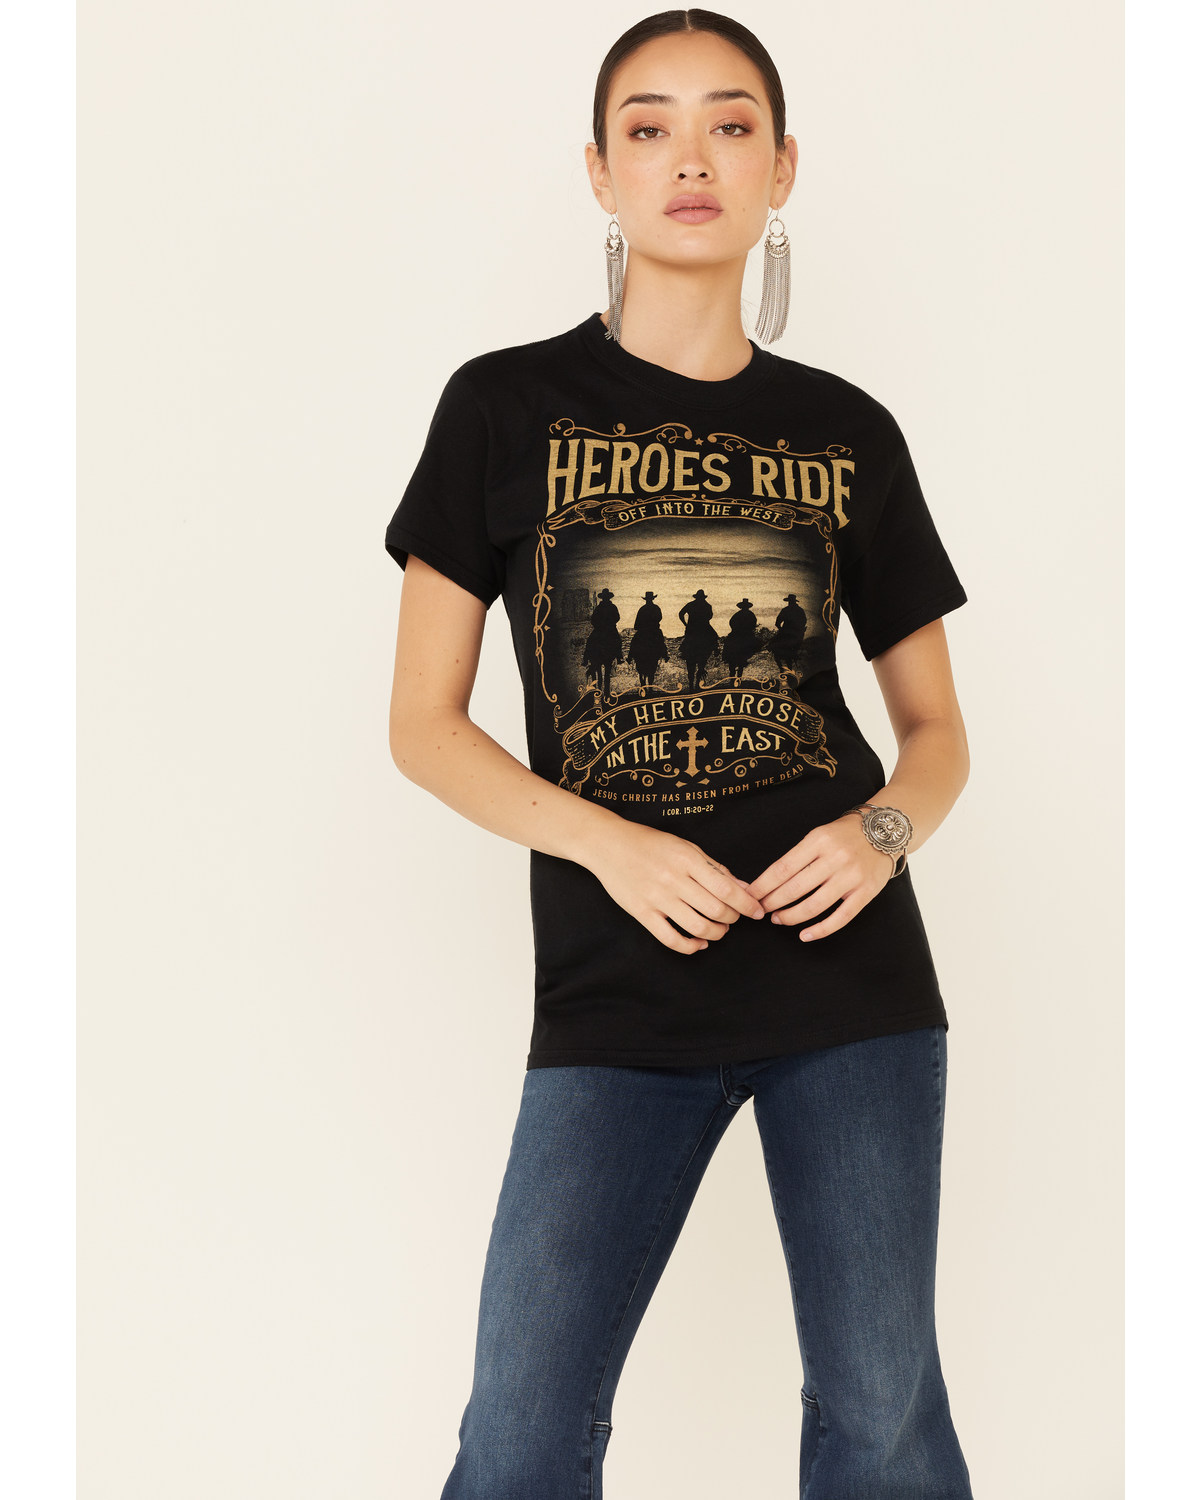 Kerusso Women's Heroes Ride Off Into The West Graphic Short Sleeve Tee